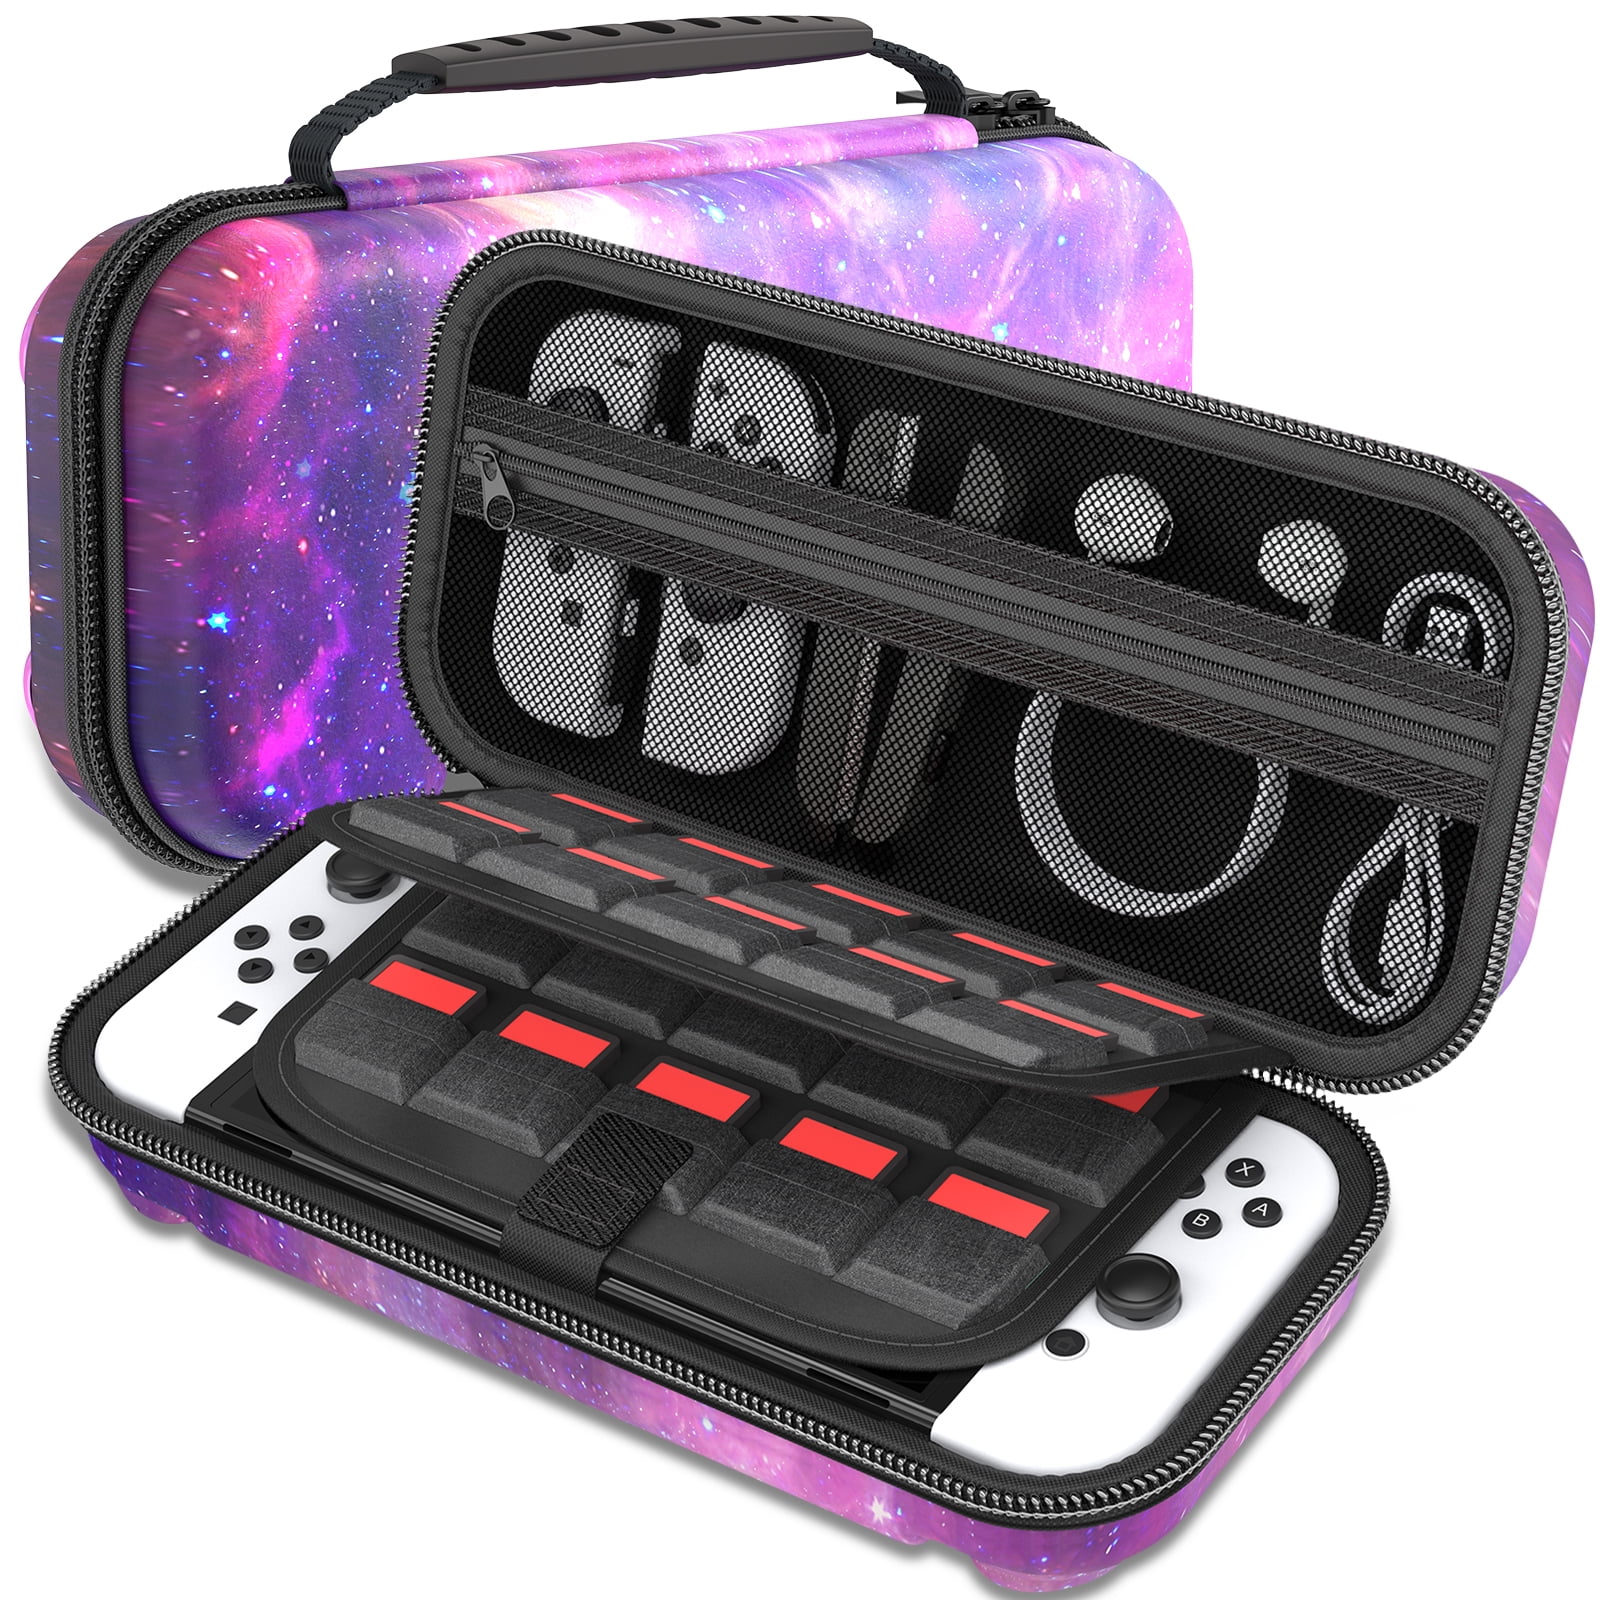 ESYWEN Switch Case for Nintendo ,Portable Switch Carry Case with Handle ...